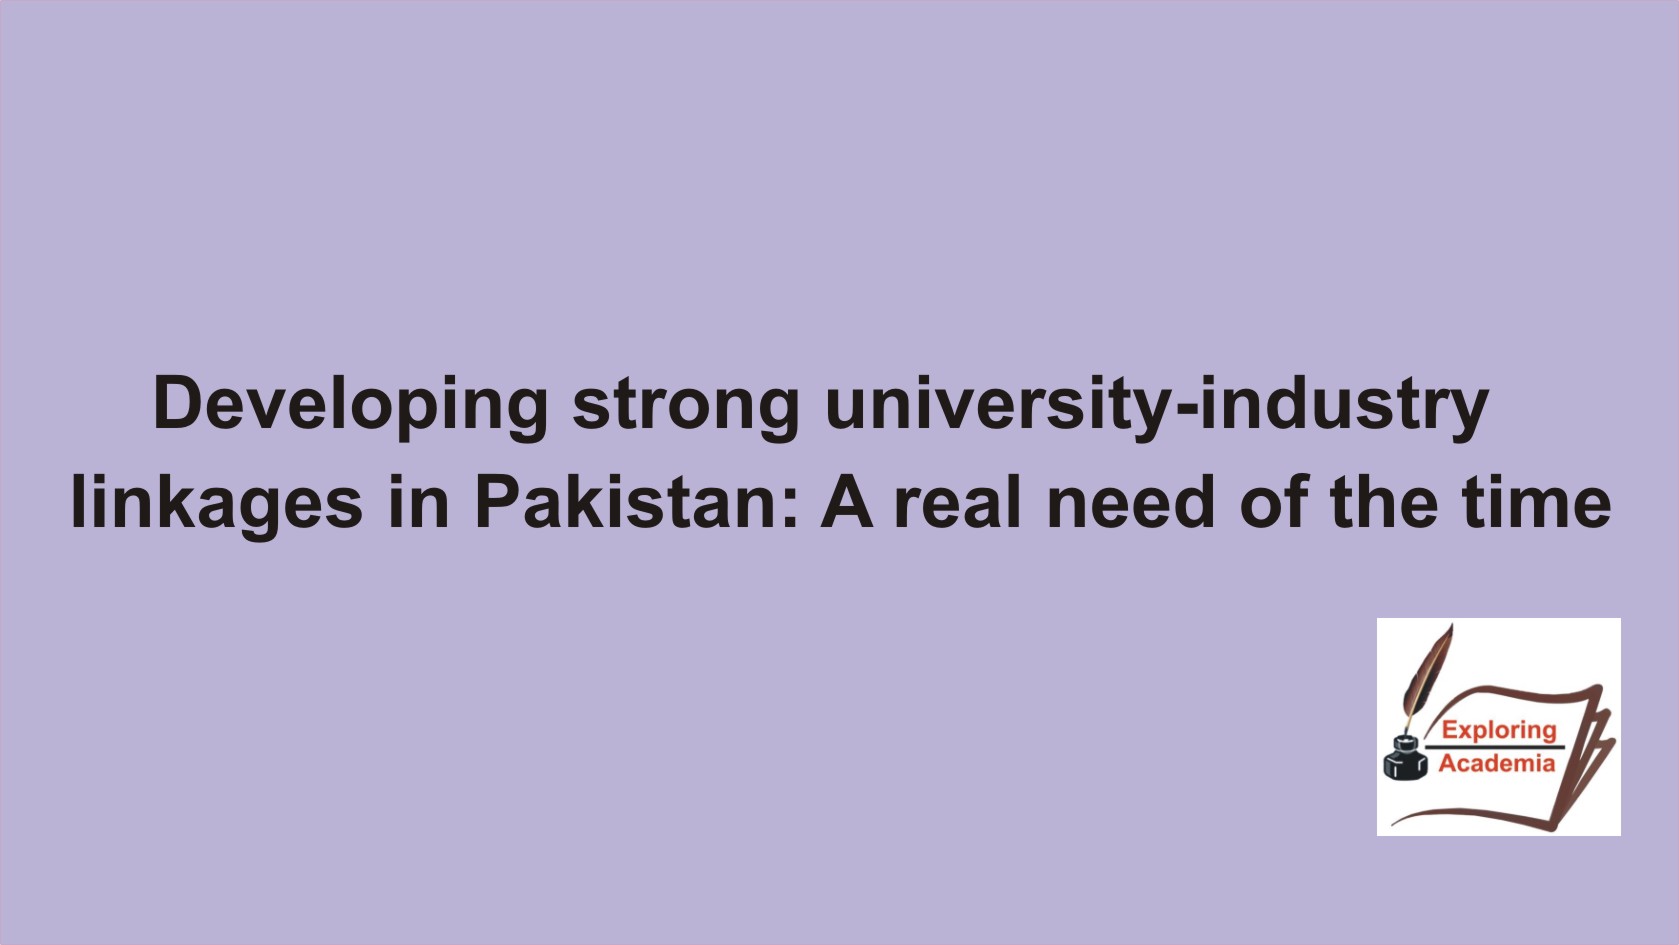 Developing strong university-industry linkages in Pakistan: A real need of the time